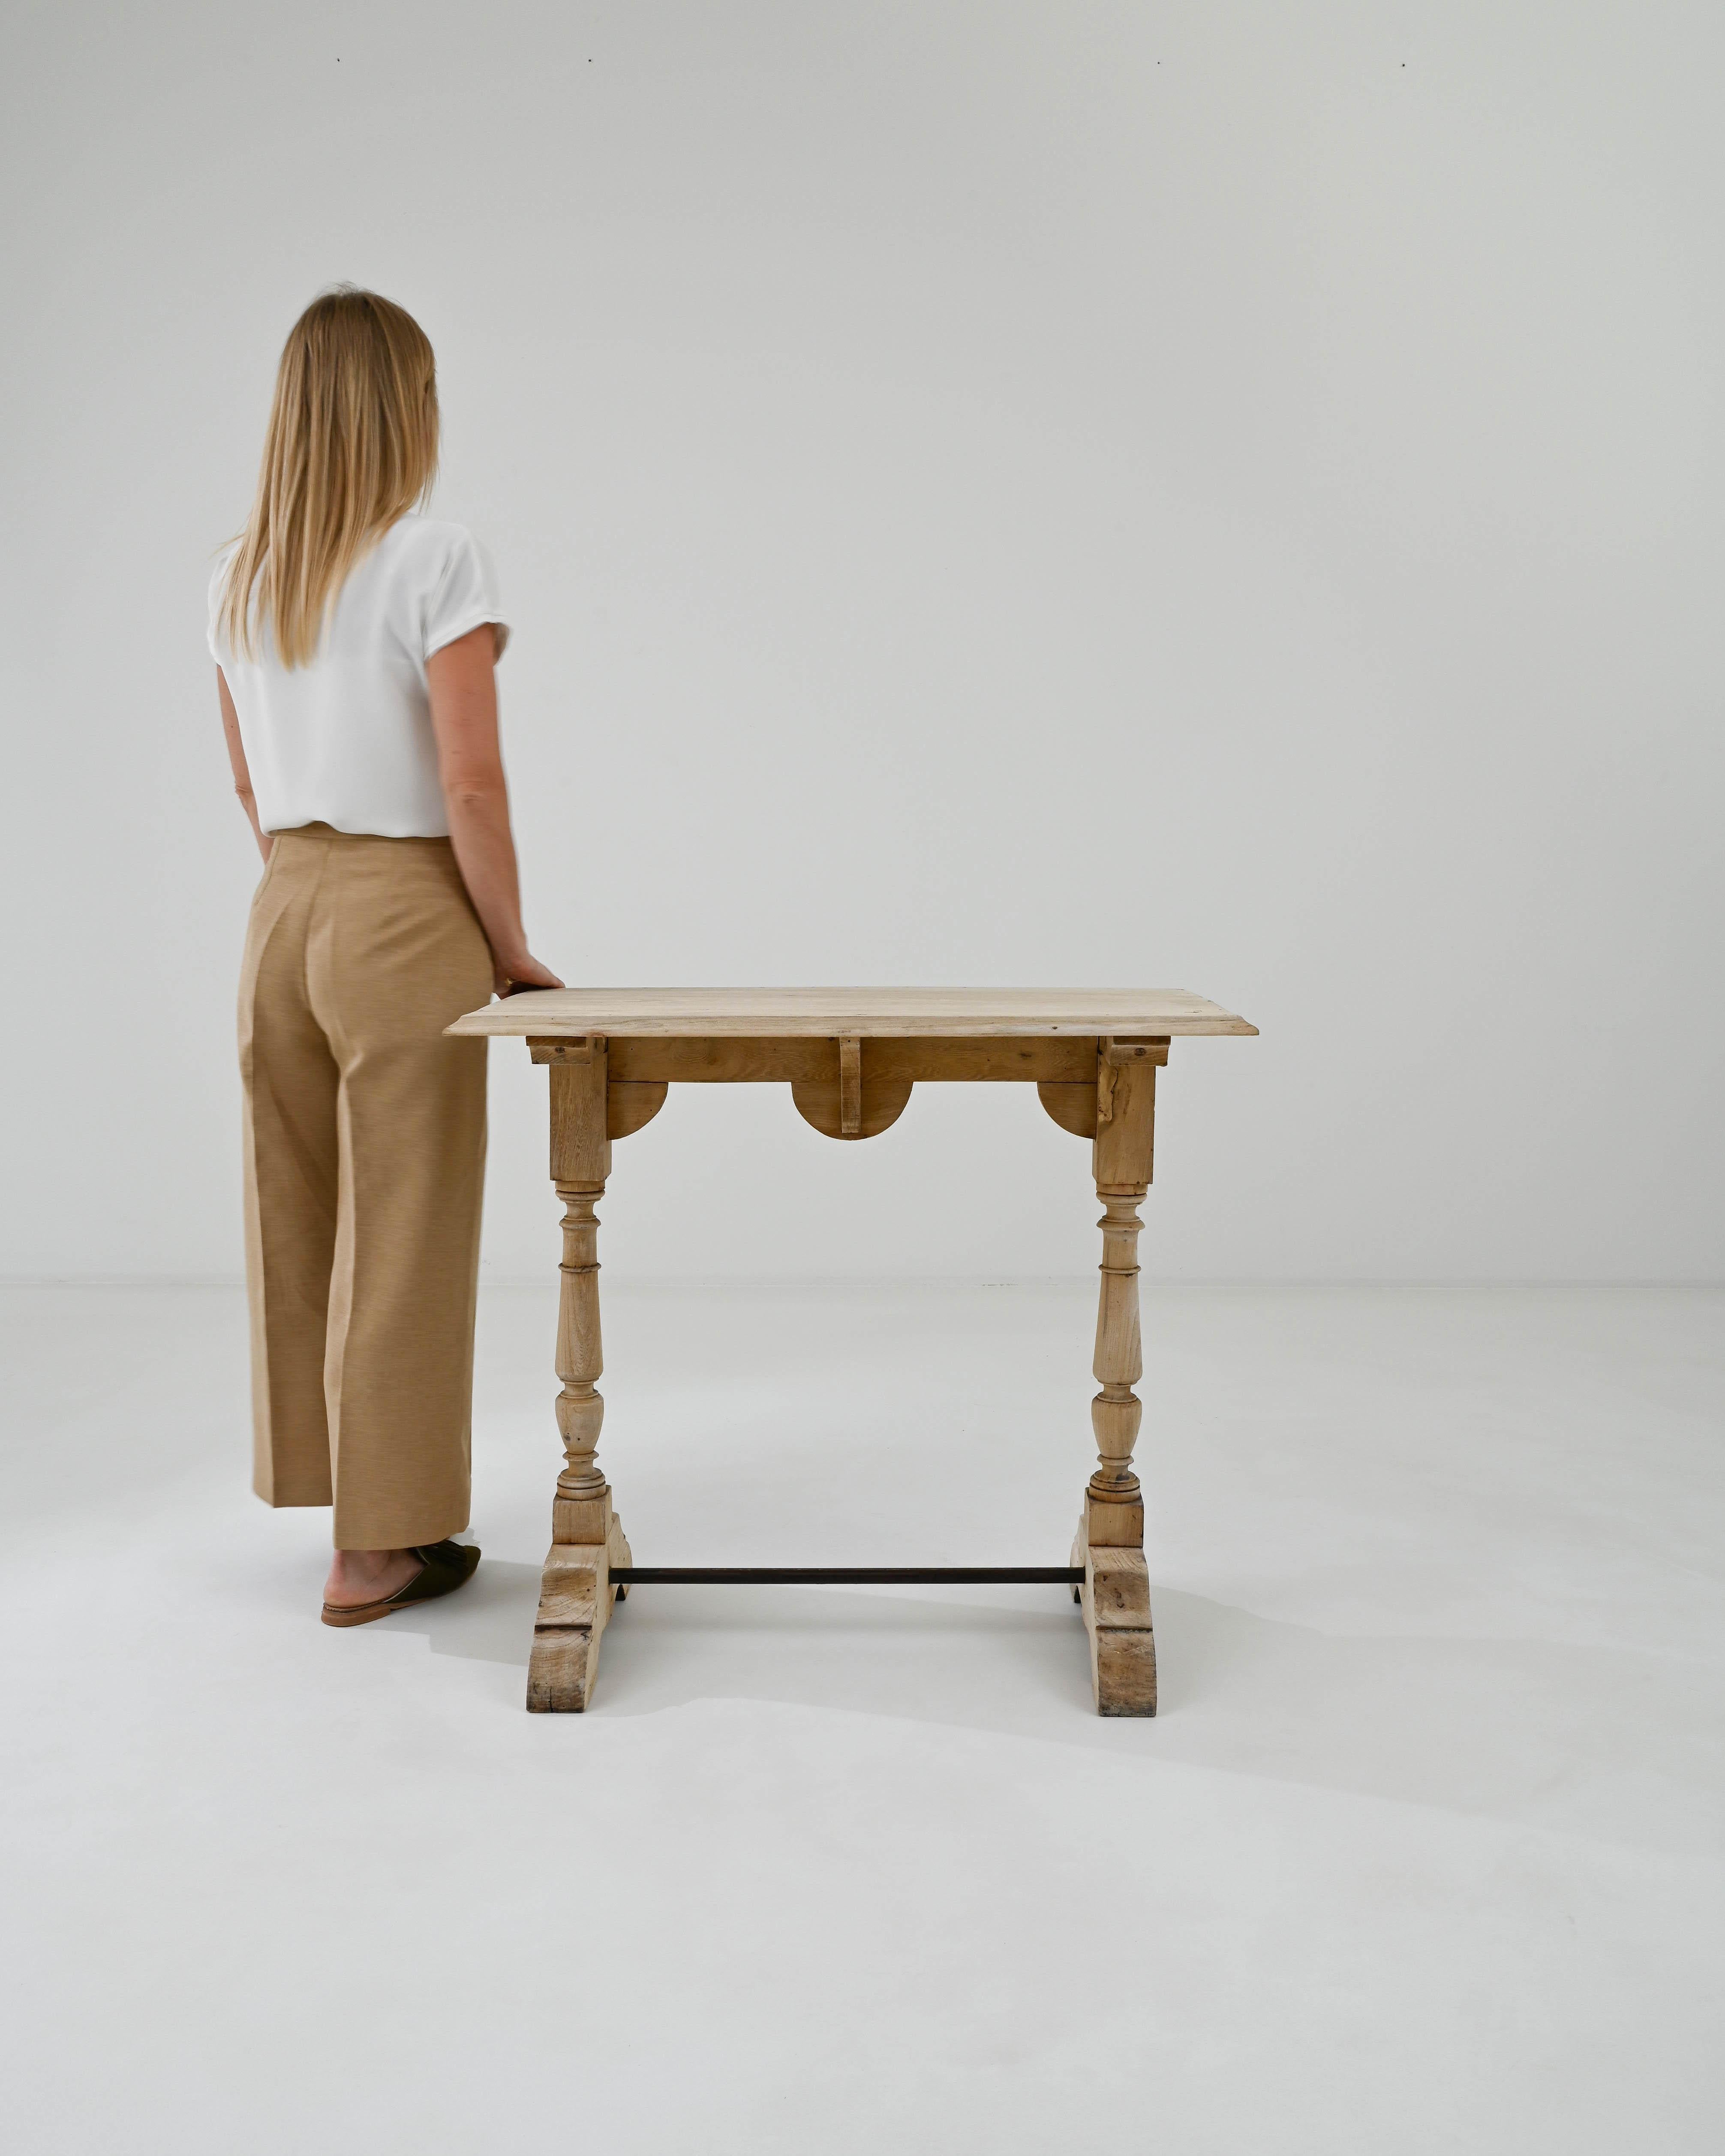 A warm patina gives this wooden console table a homey character. Built in France at the turn of the century, the original finish of the wood has aged over the years to a honeyed polish. The form has an appealing simplicity: a rectangular tabletop